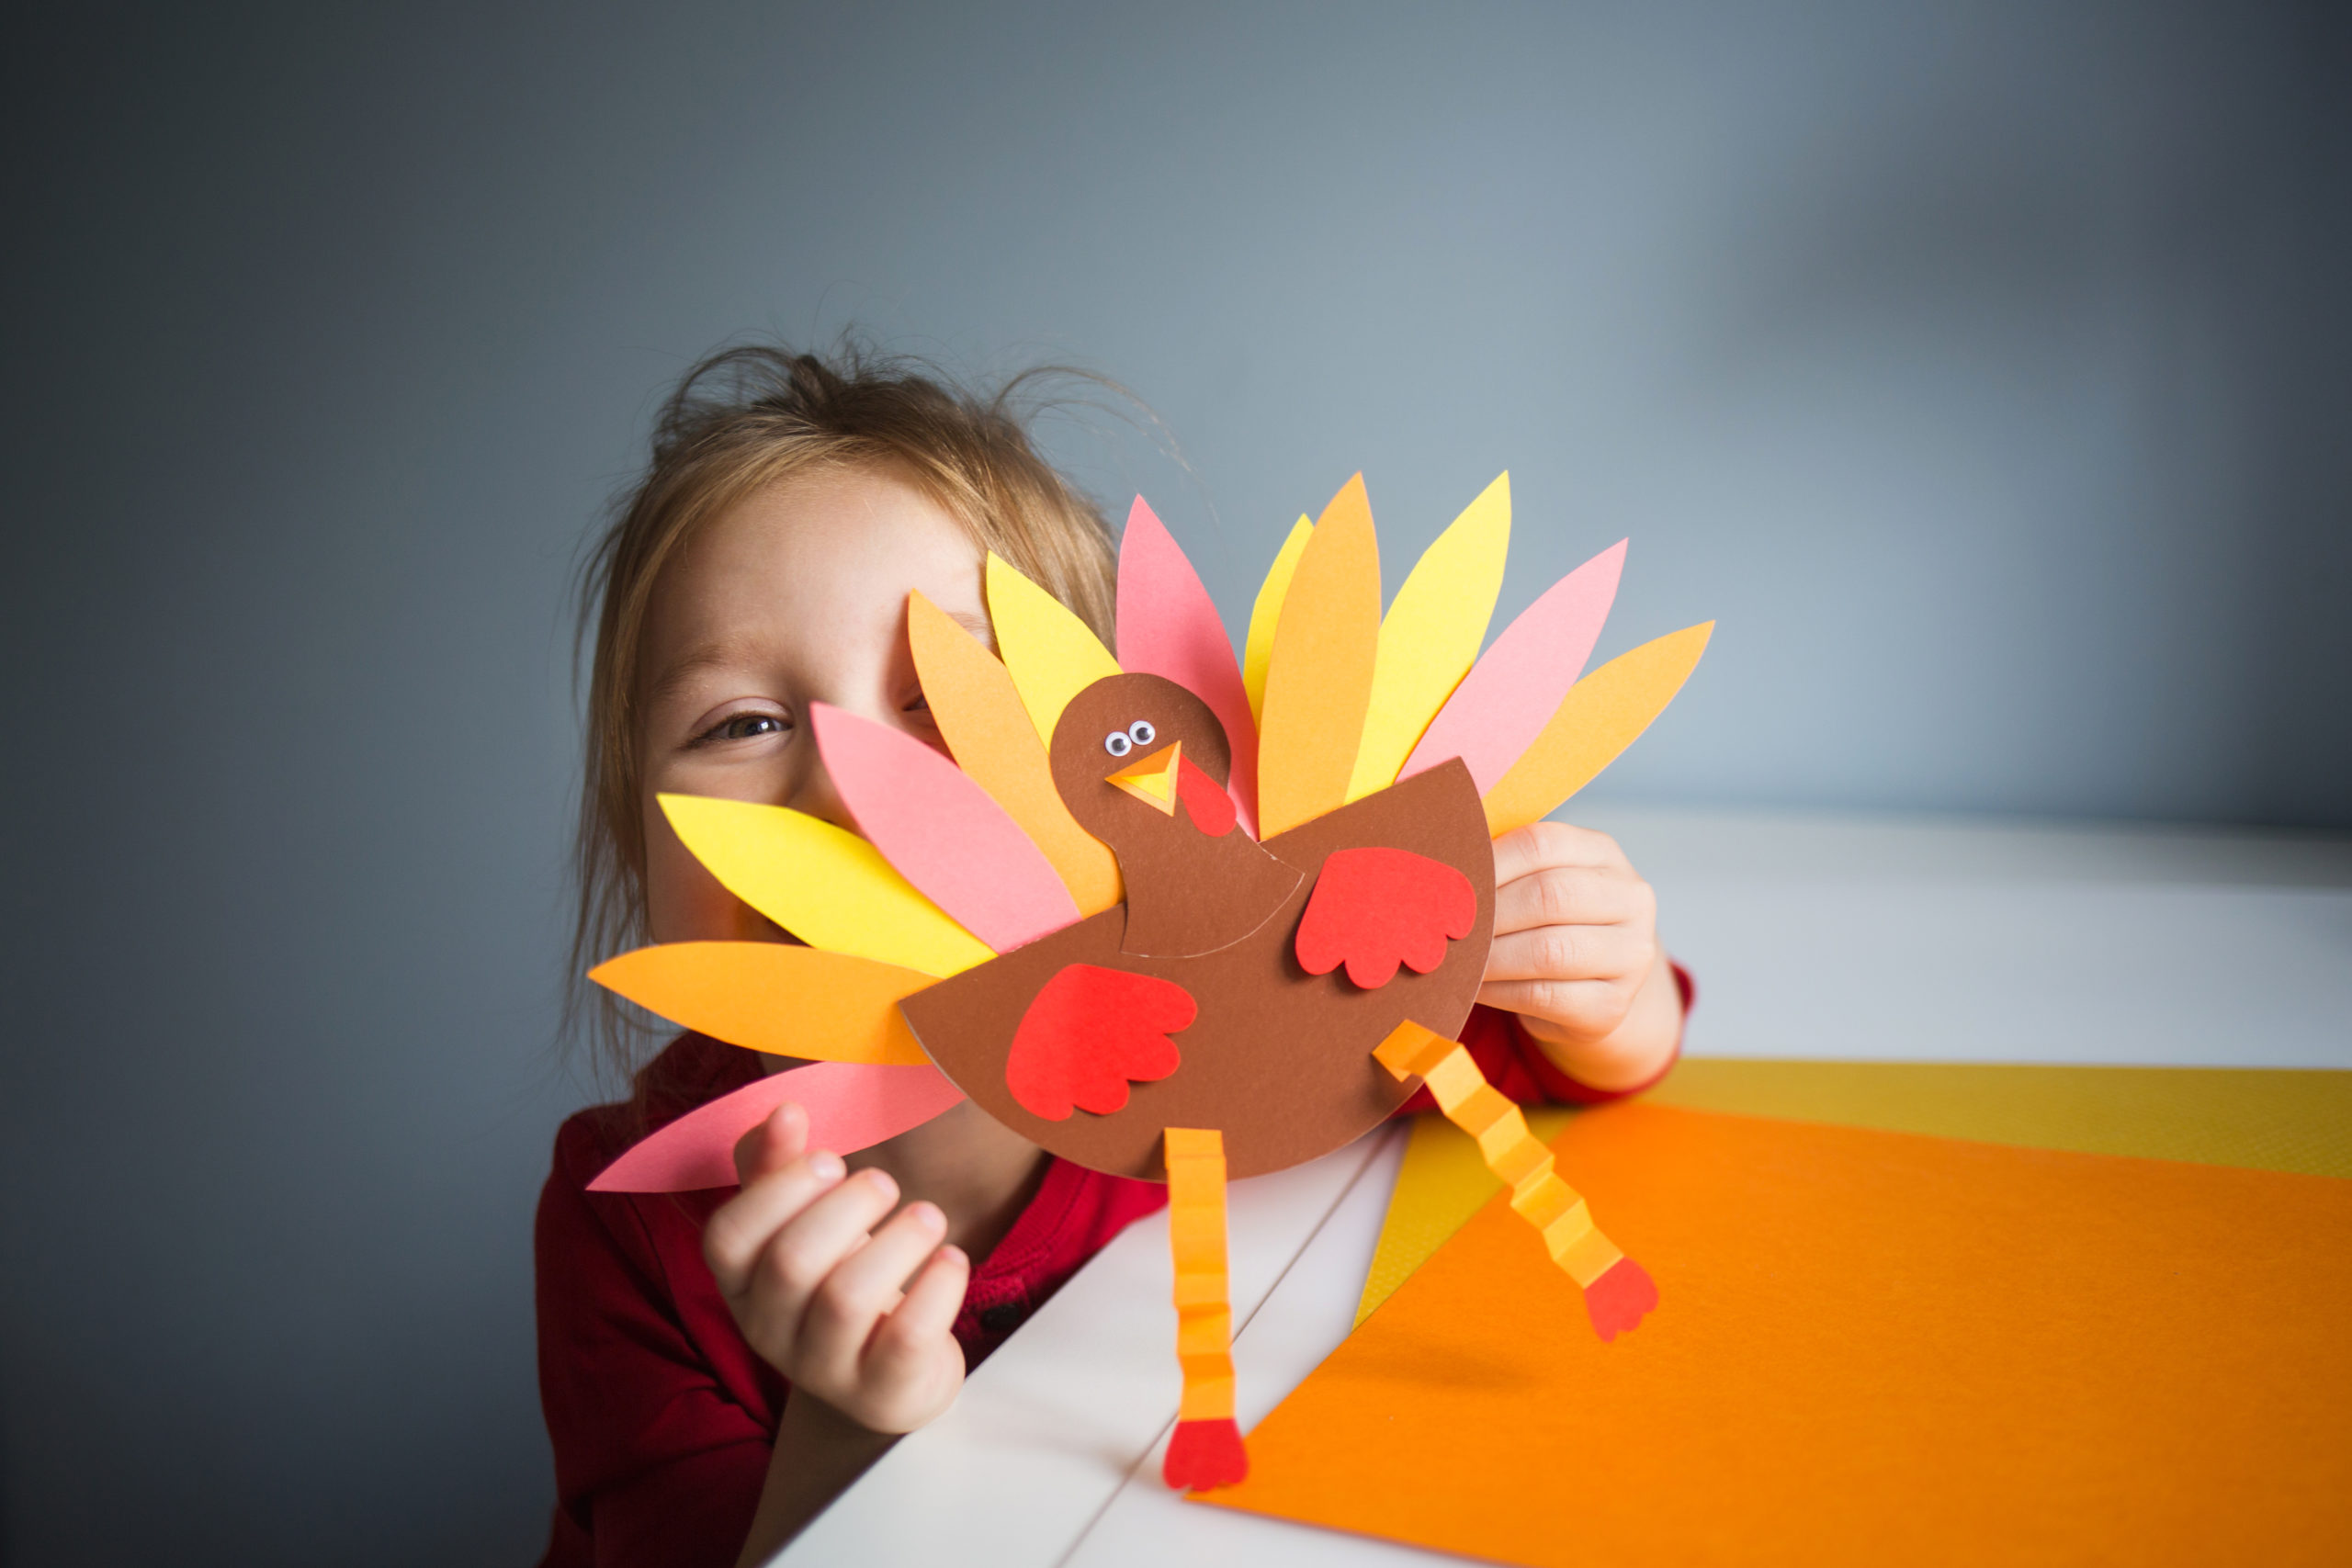 paper craft for kids. DIY Turkey made for thanksgiving day. create art for children. girl playing with a toy